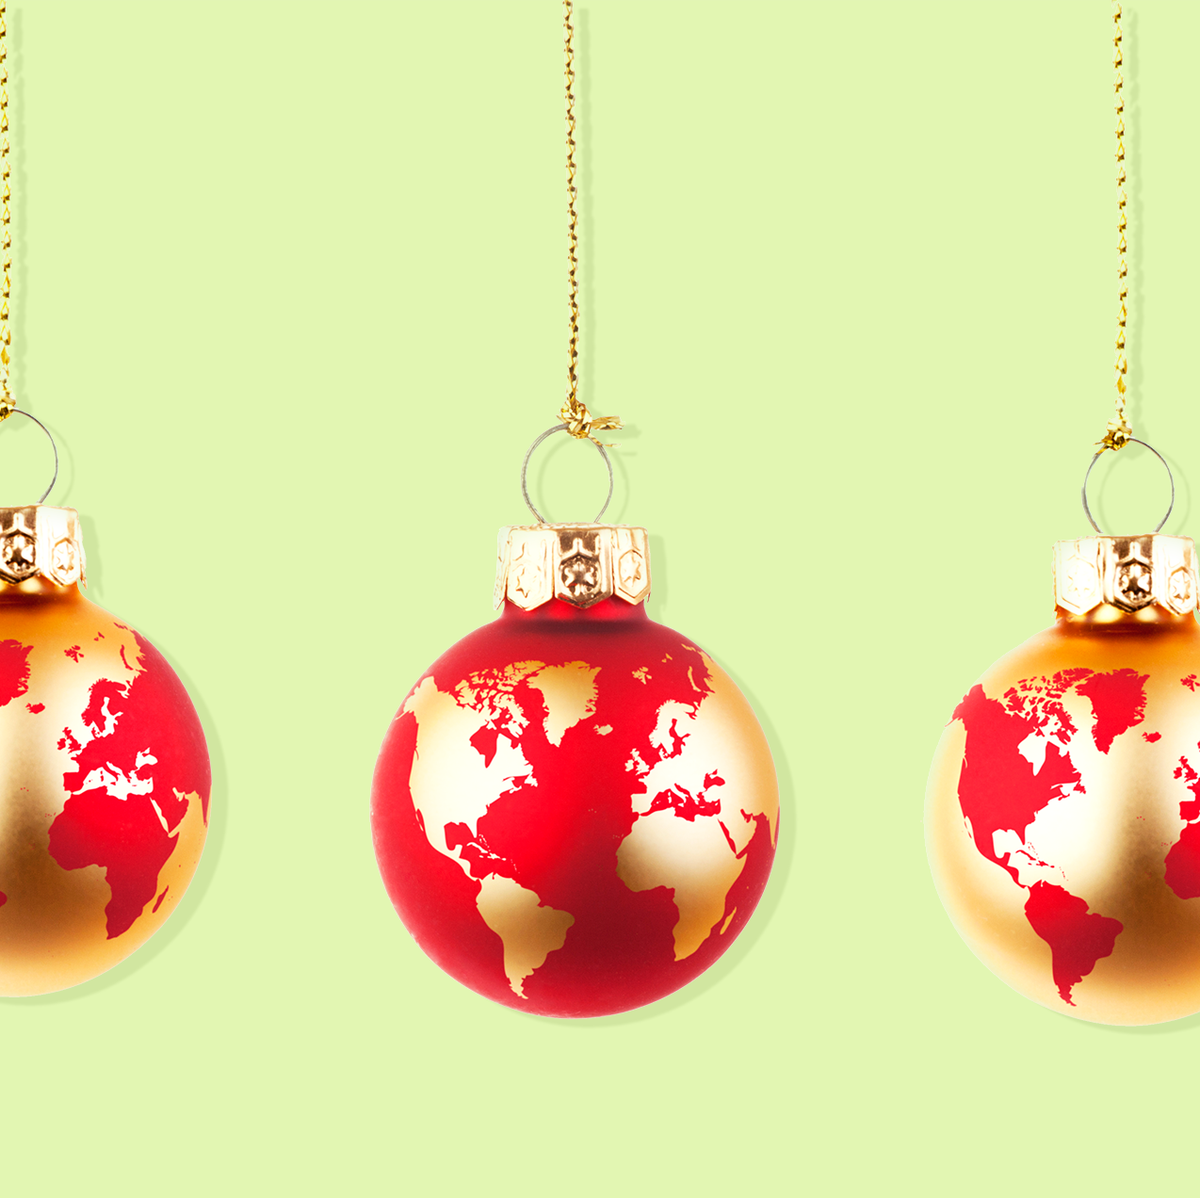 Christmas All Over the World - How People Celebrate Worldwide